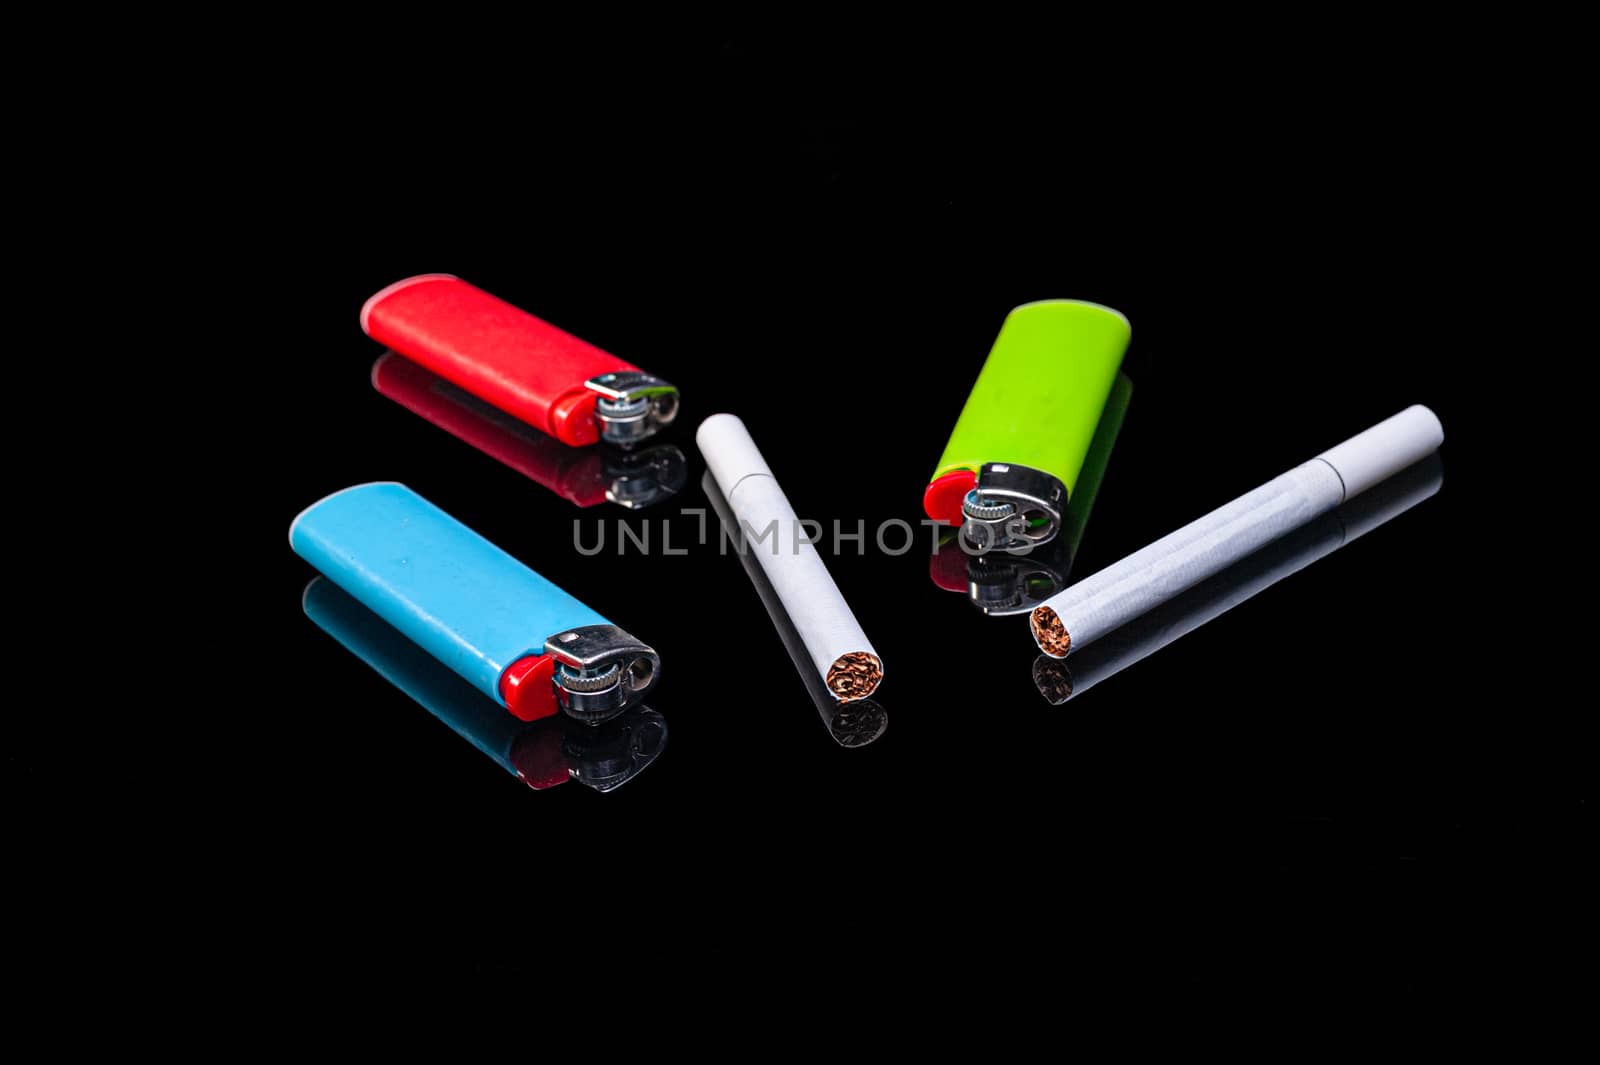 white filter cigarettes and plastic gas lighters of different colors on an isolated black background with reflection